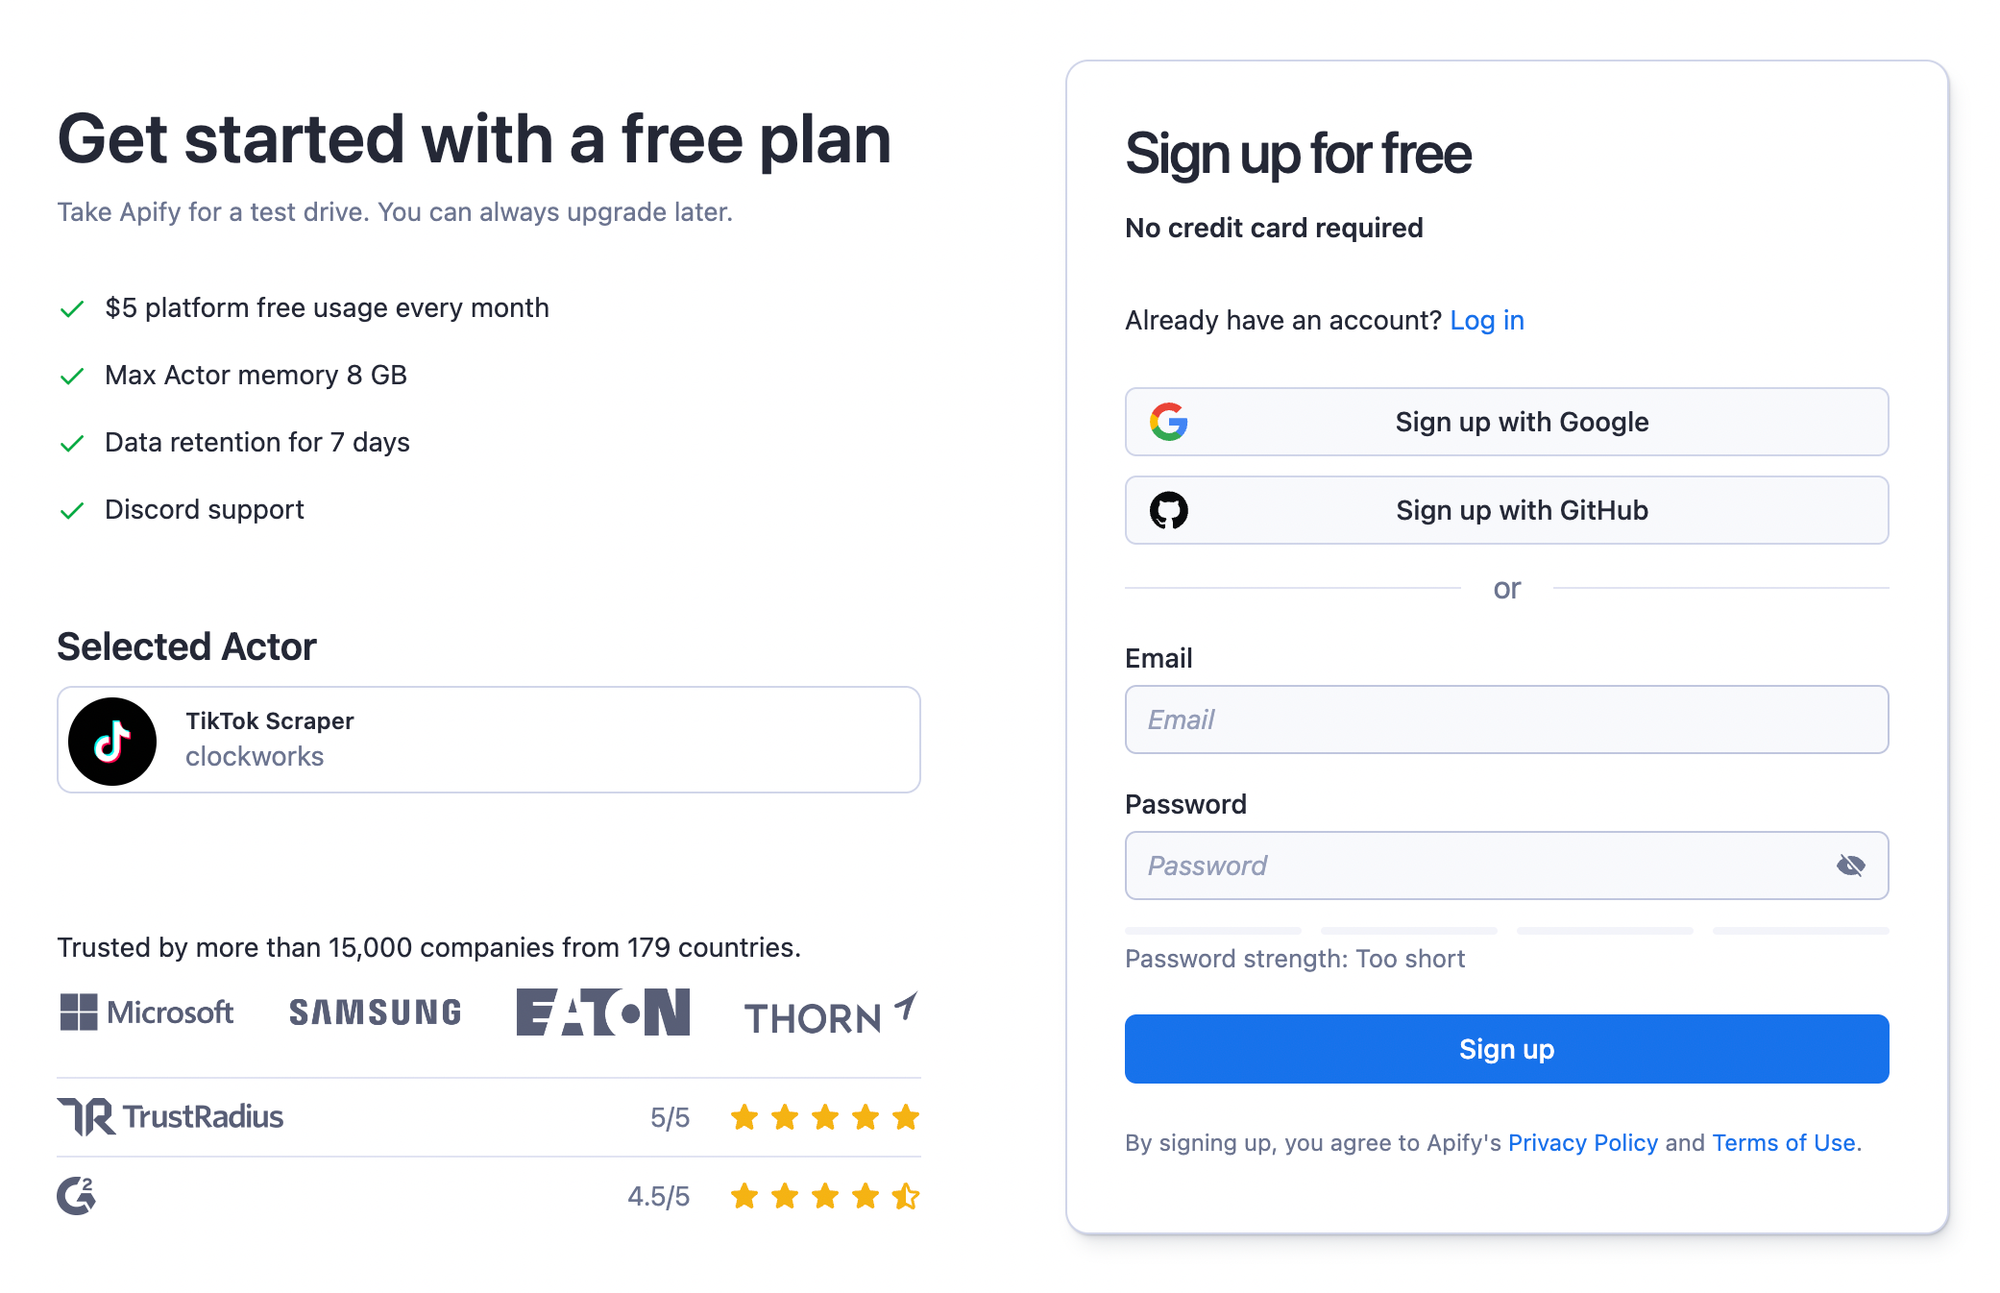 Sign up for a free account using your email, Gmail, or GitHub 